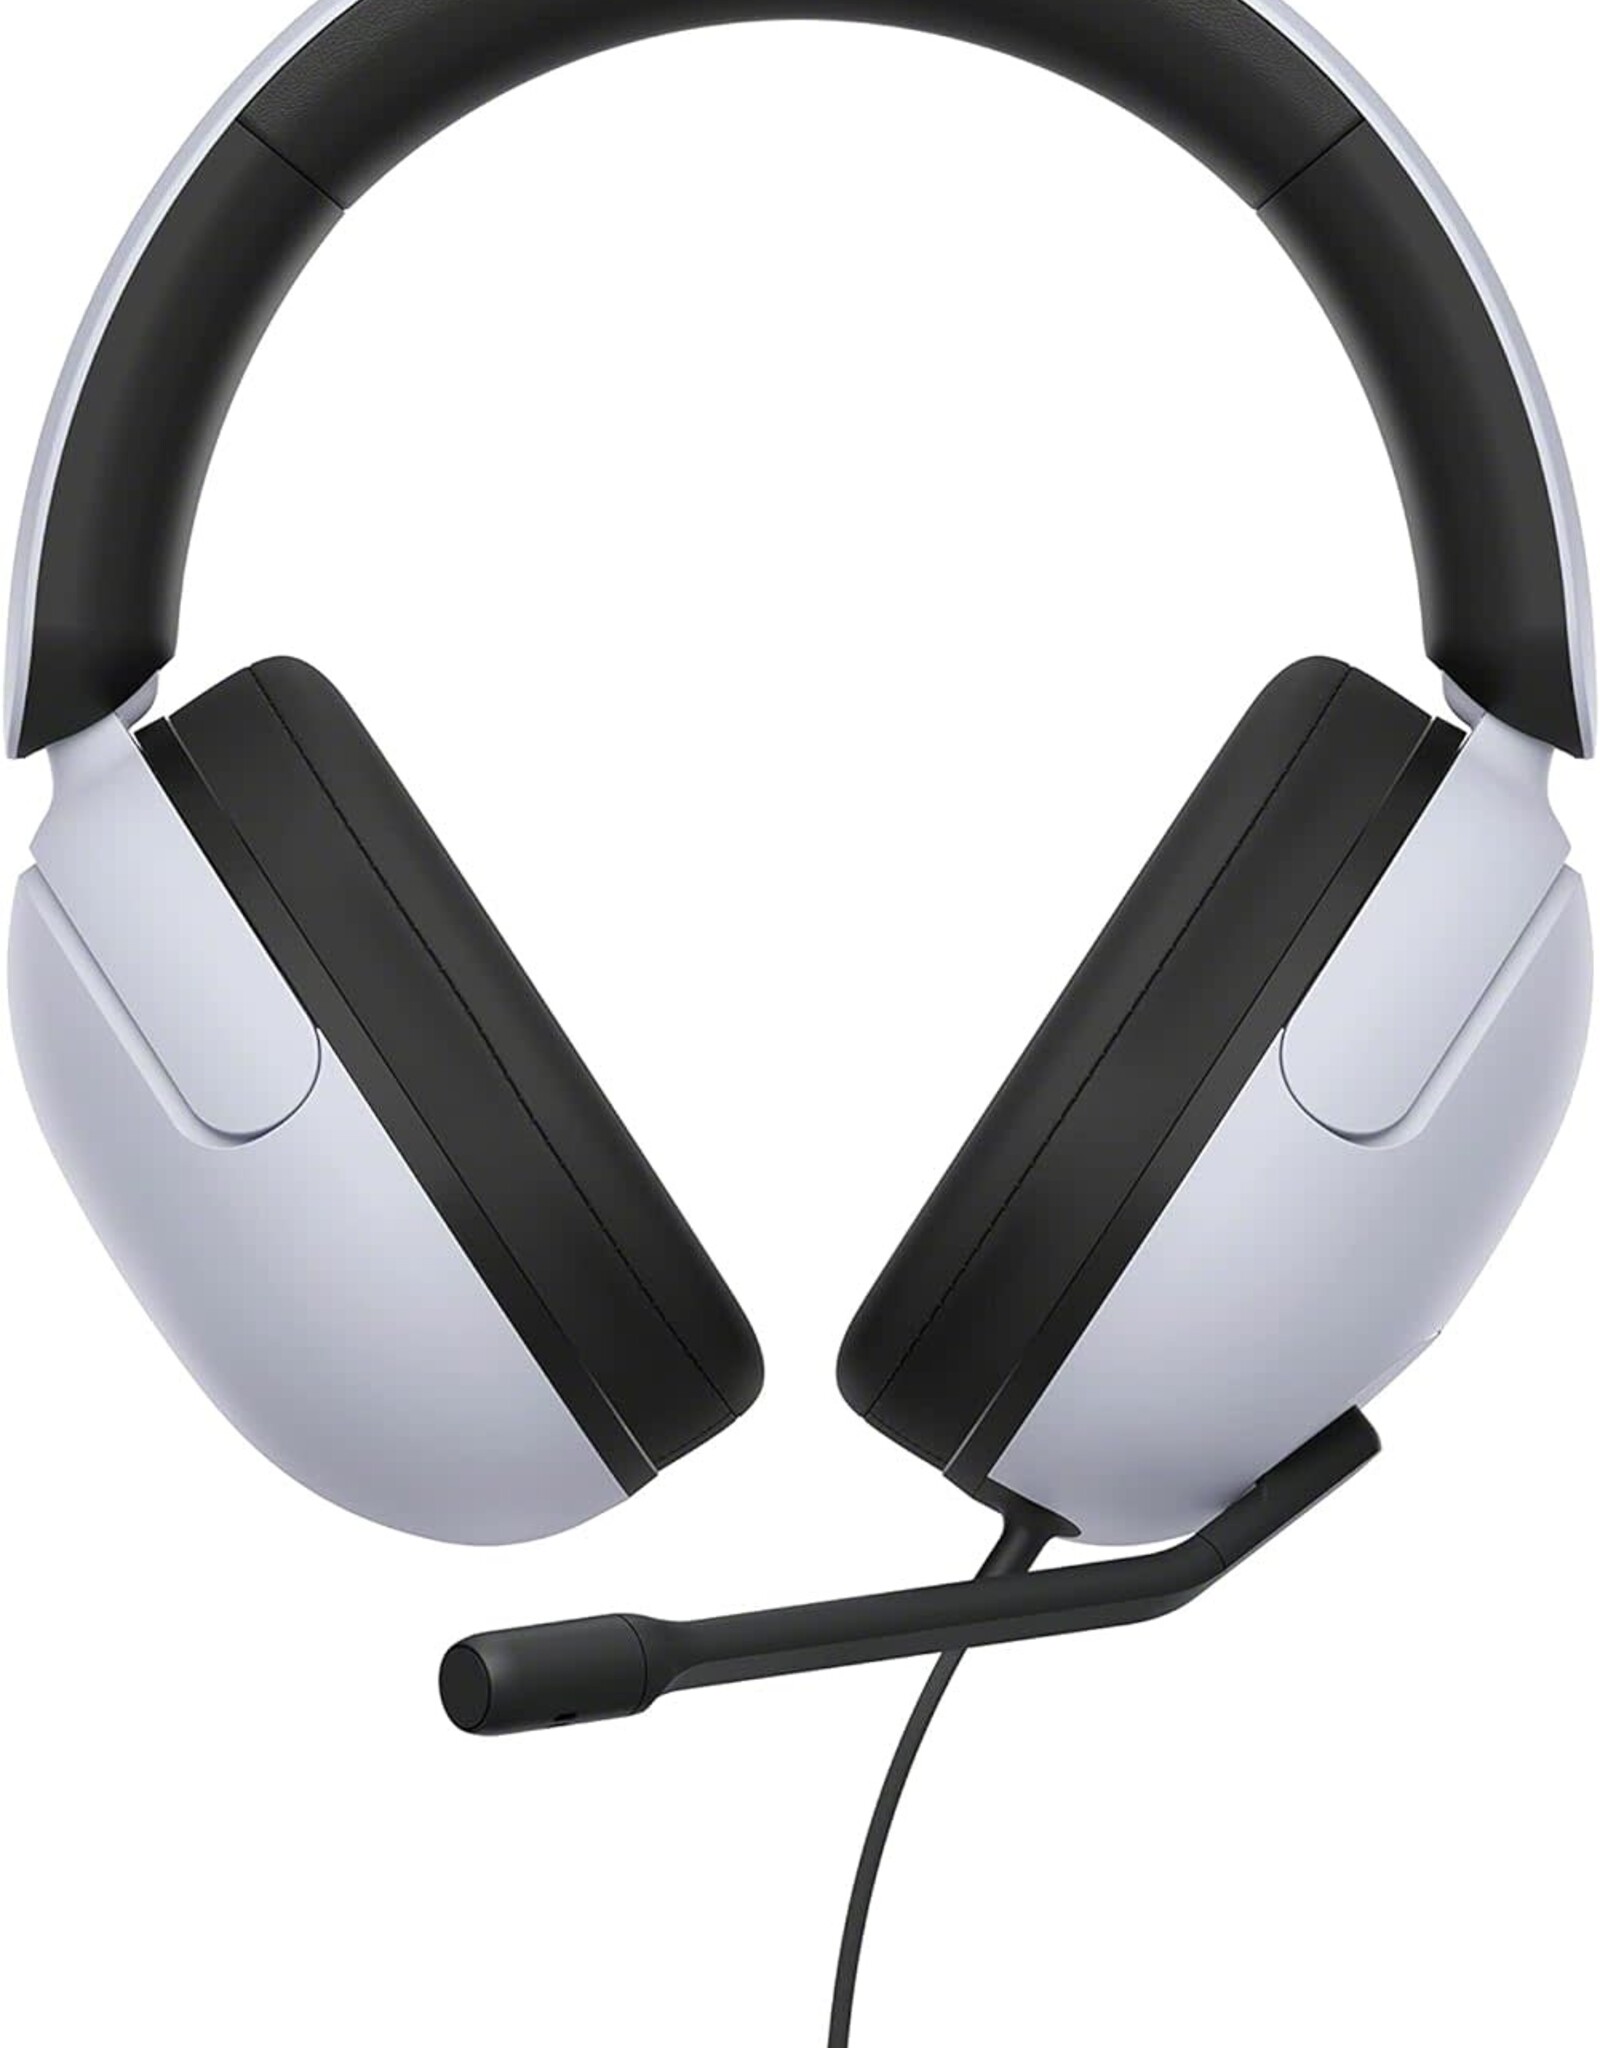 Sony-INZONE H3 Wired Gaming Headset, Over-ear Headphones with 360 Spatial Sound, MDR-G300,White